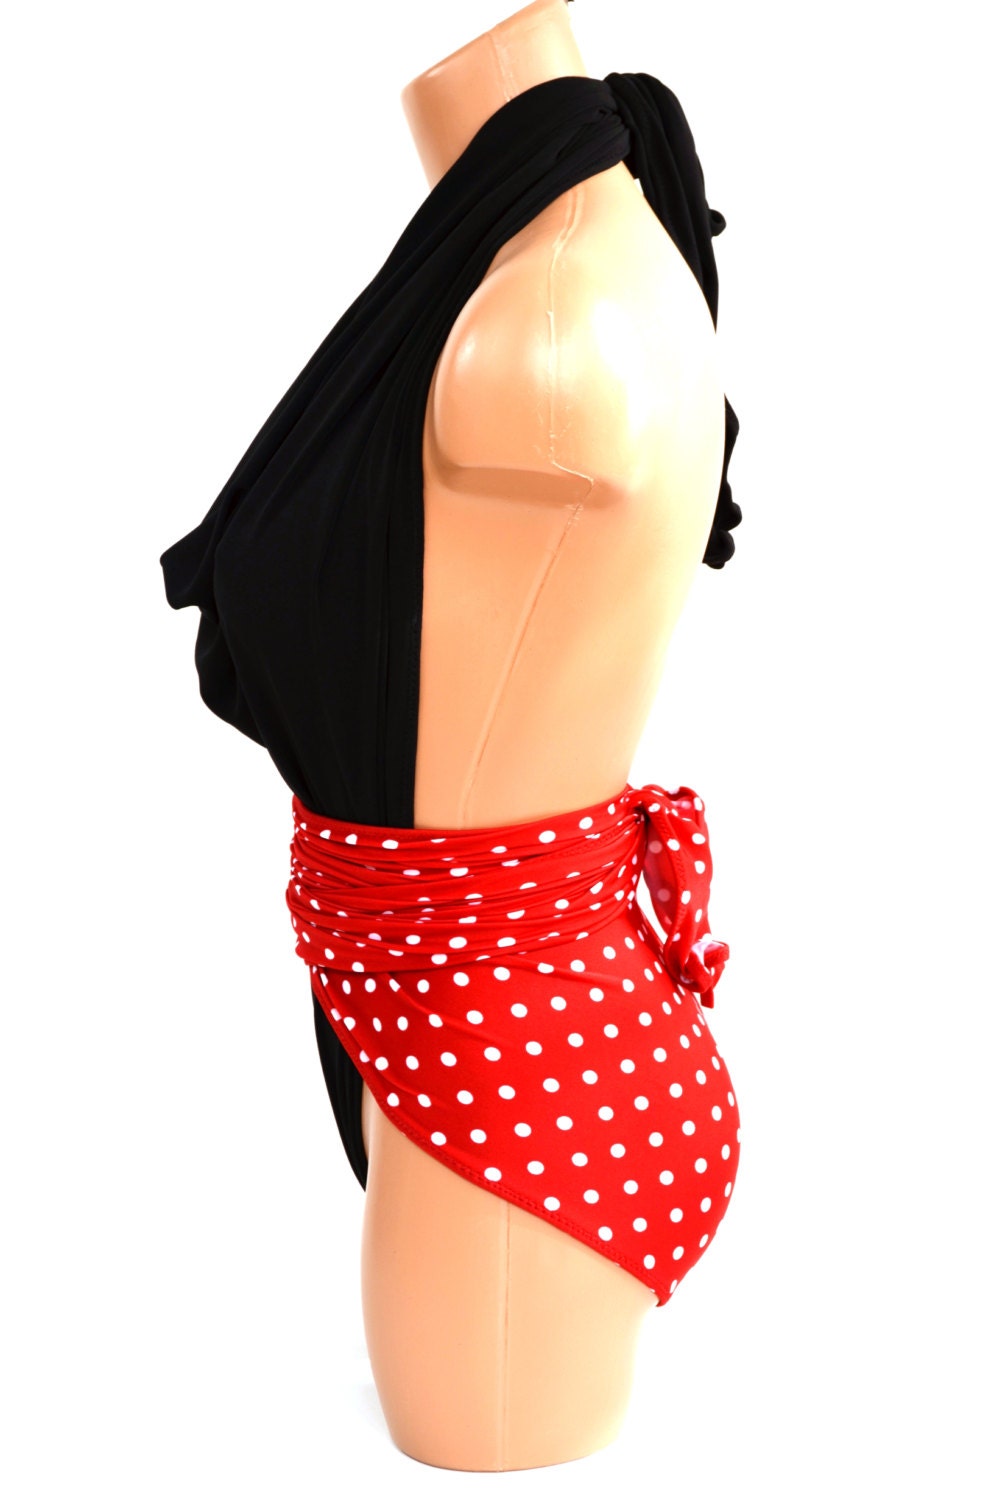 Medium Bathing Suit Wrap Around Swimsuit Red Polka Dots By Hisopal